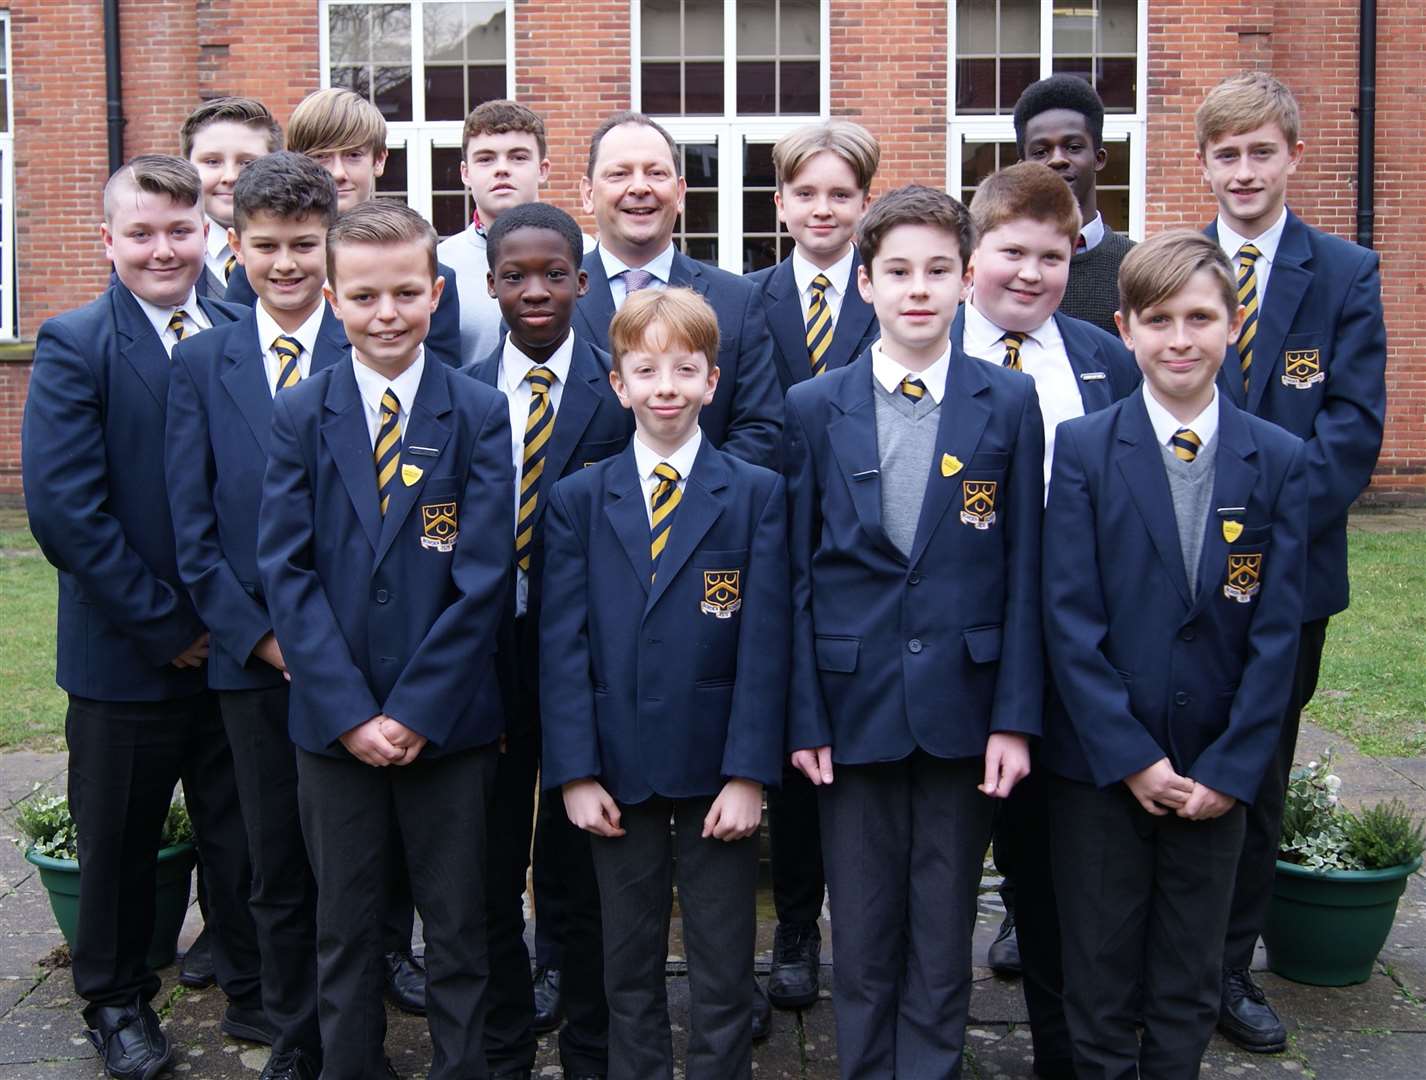 Jonathan Hopkins with Borden Grammar School pupils on his final day before leaving to take up another headship in Canterbury